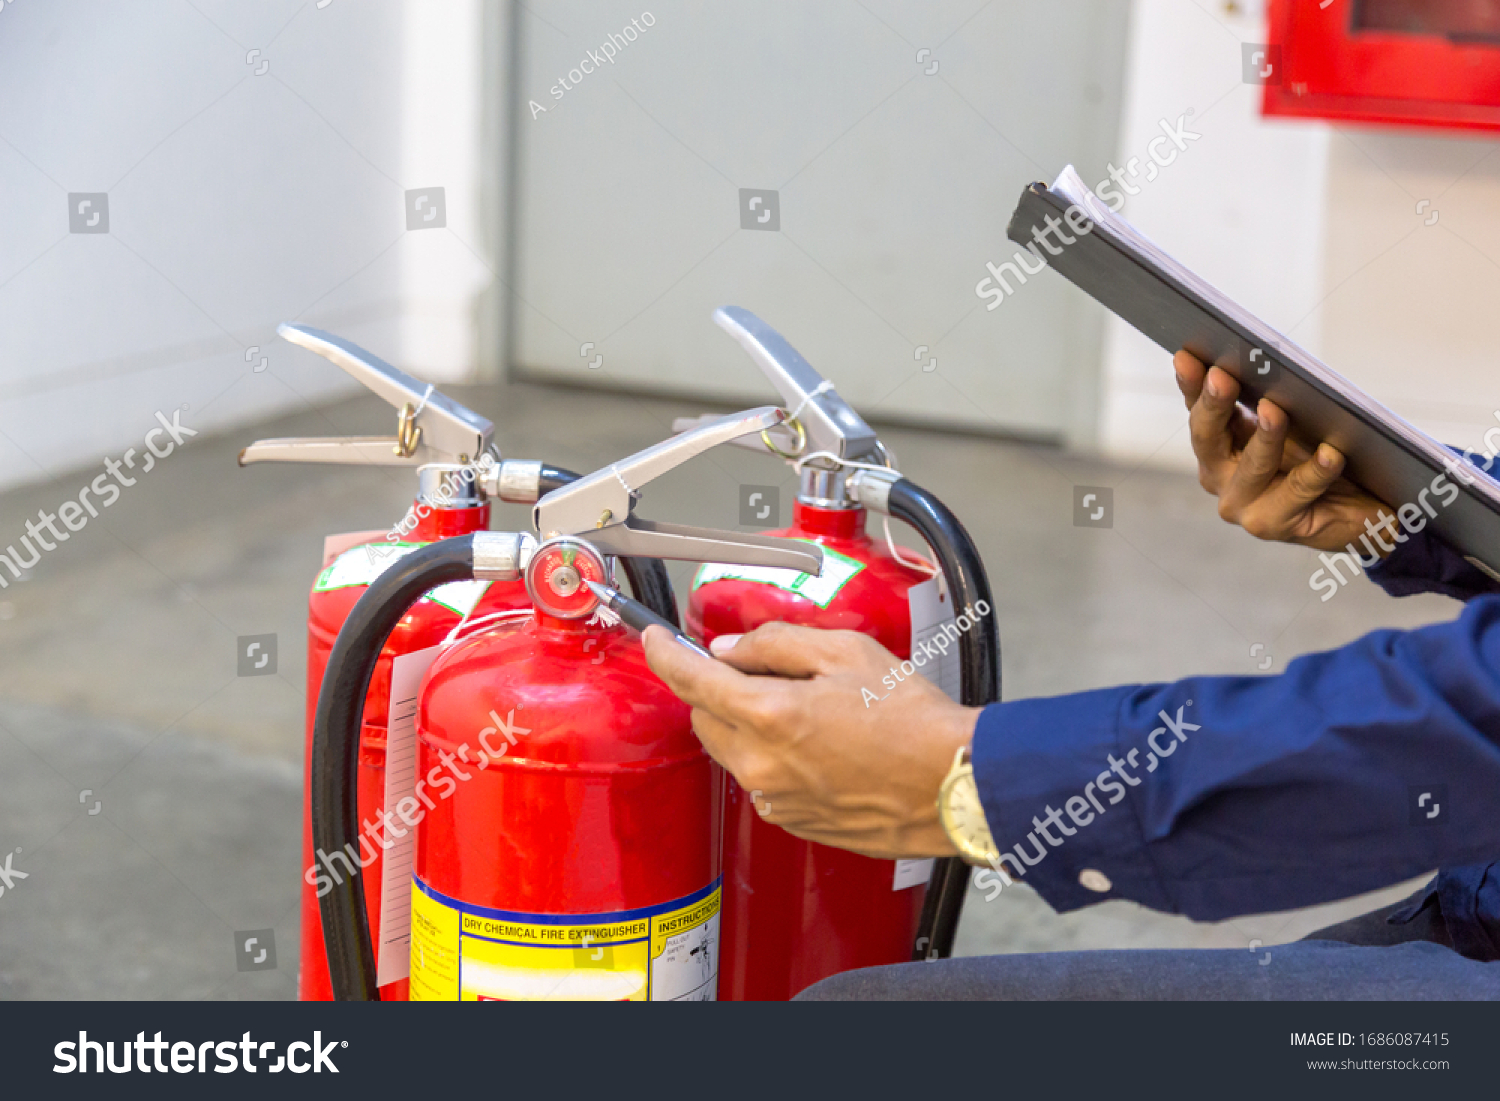 Engineer checking Industrial fire control system,Fire Alarm controller, Fire notifier, Anti fire.System ready In the event of a fire. #1686087415